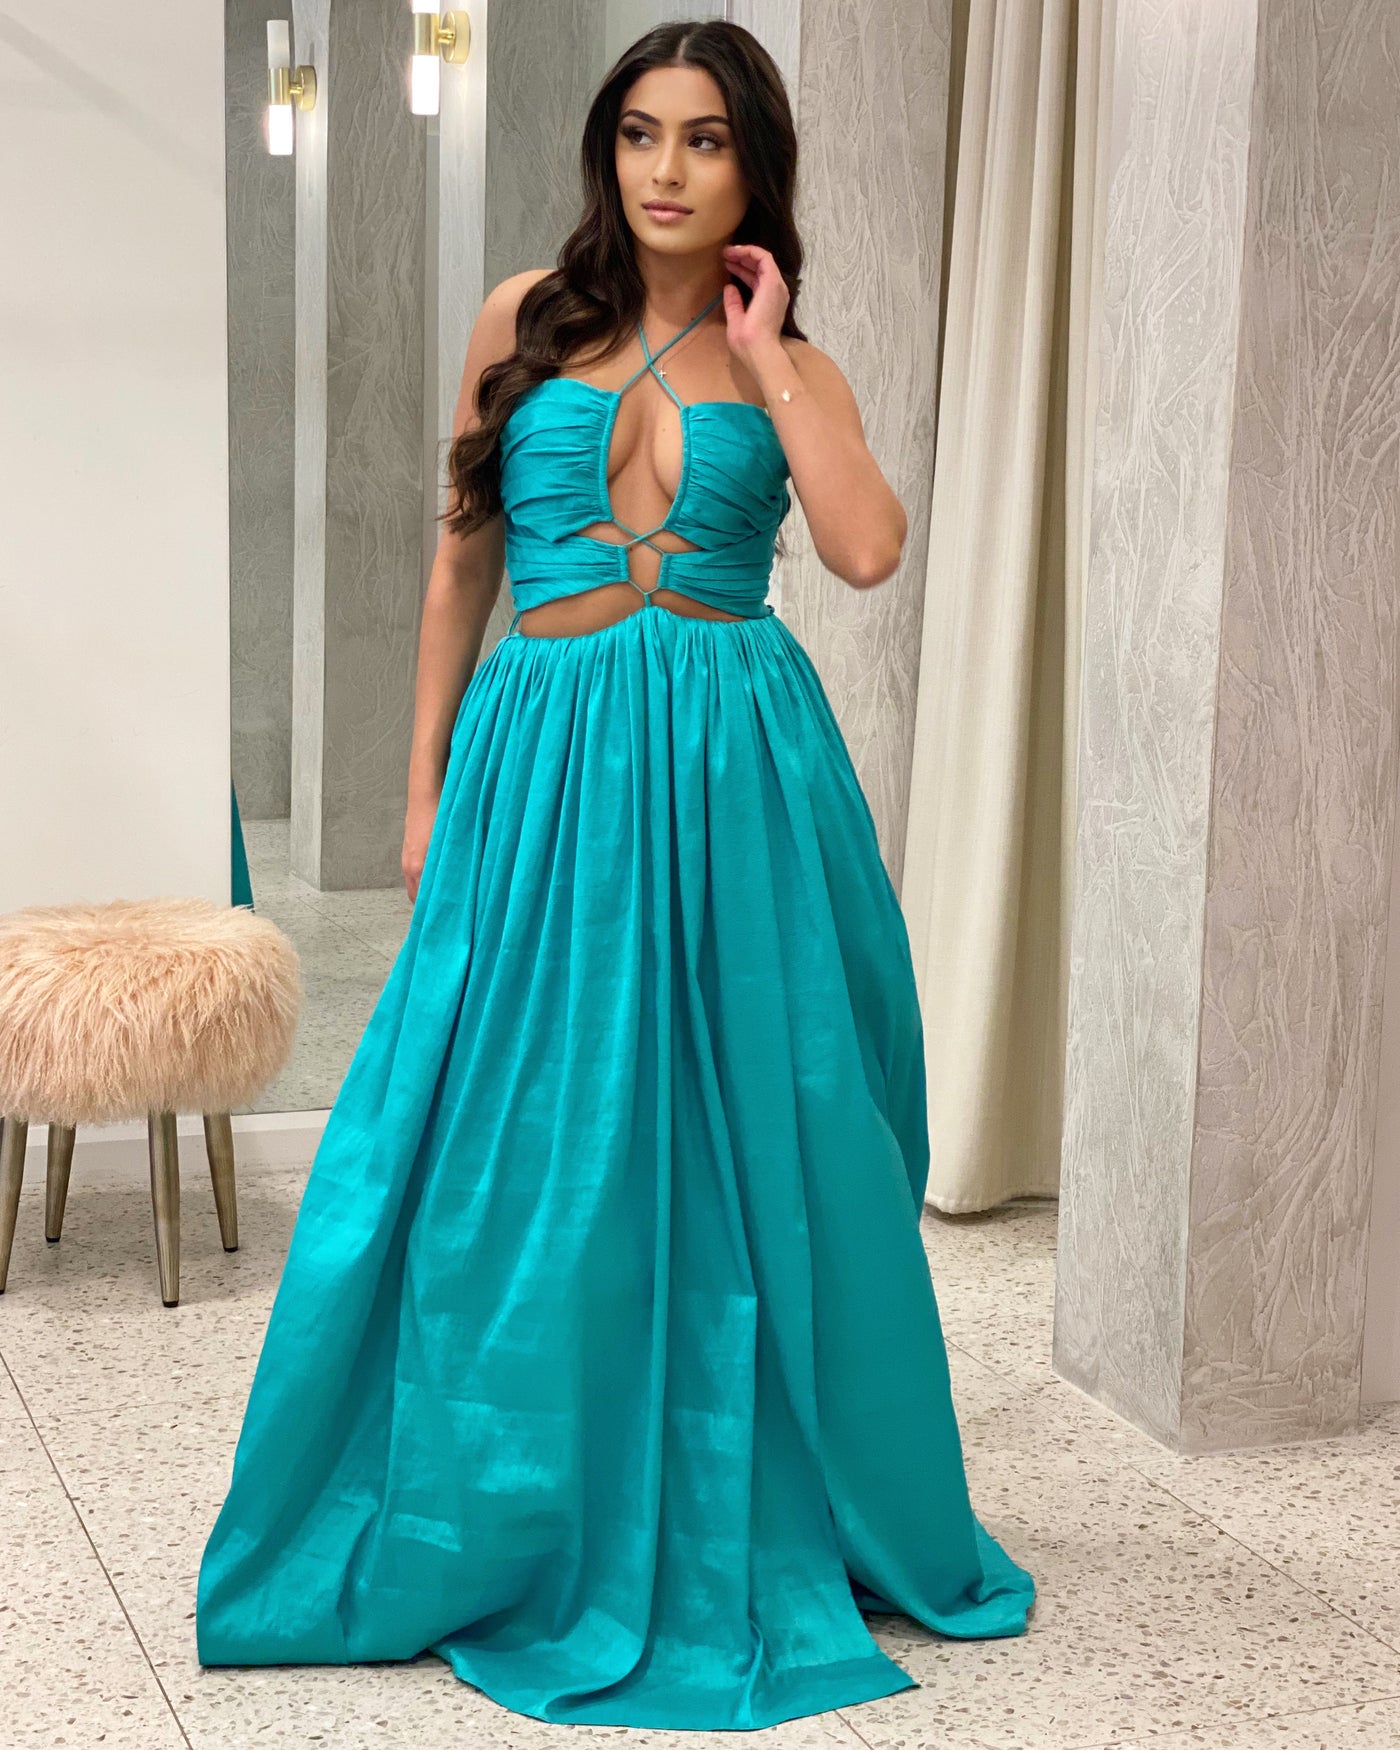 Northern Lights Gown - Turquoise